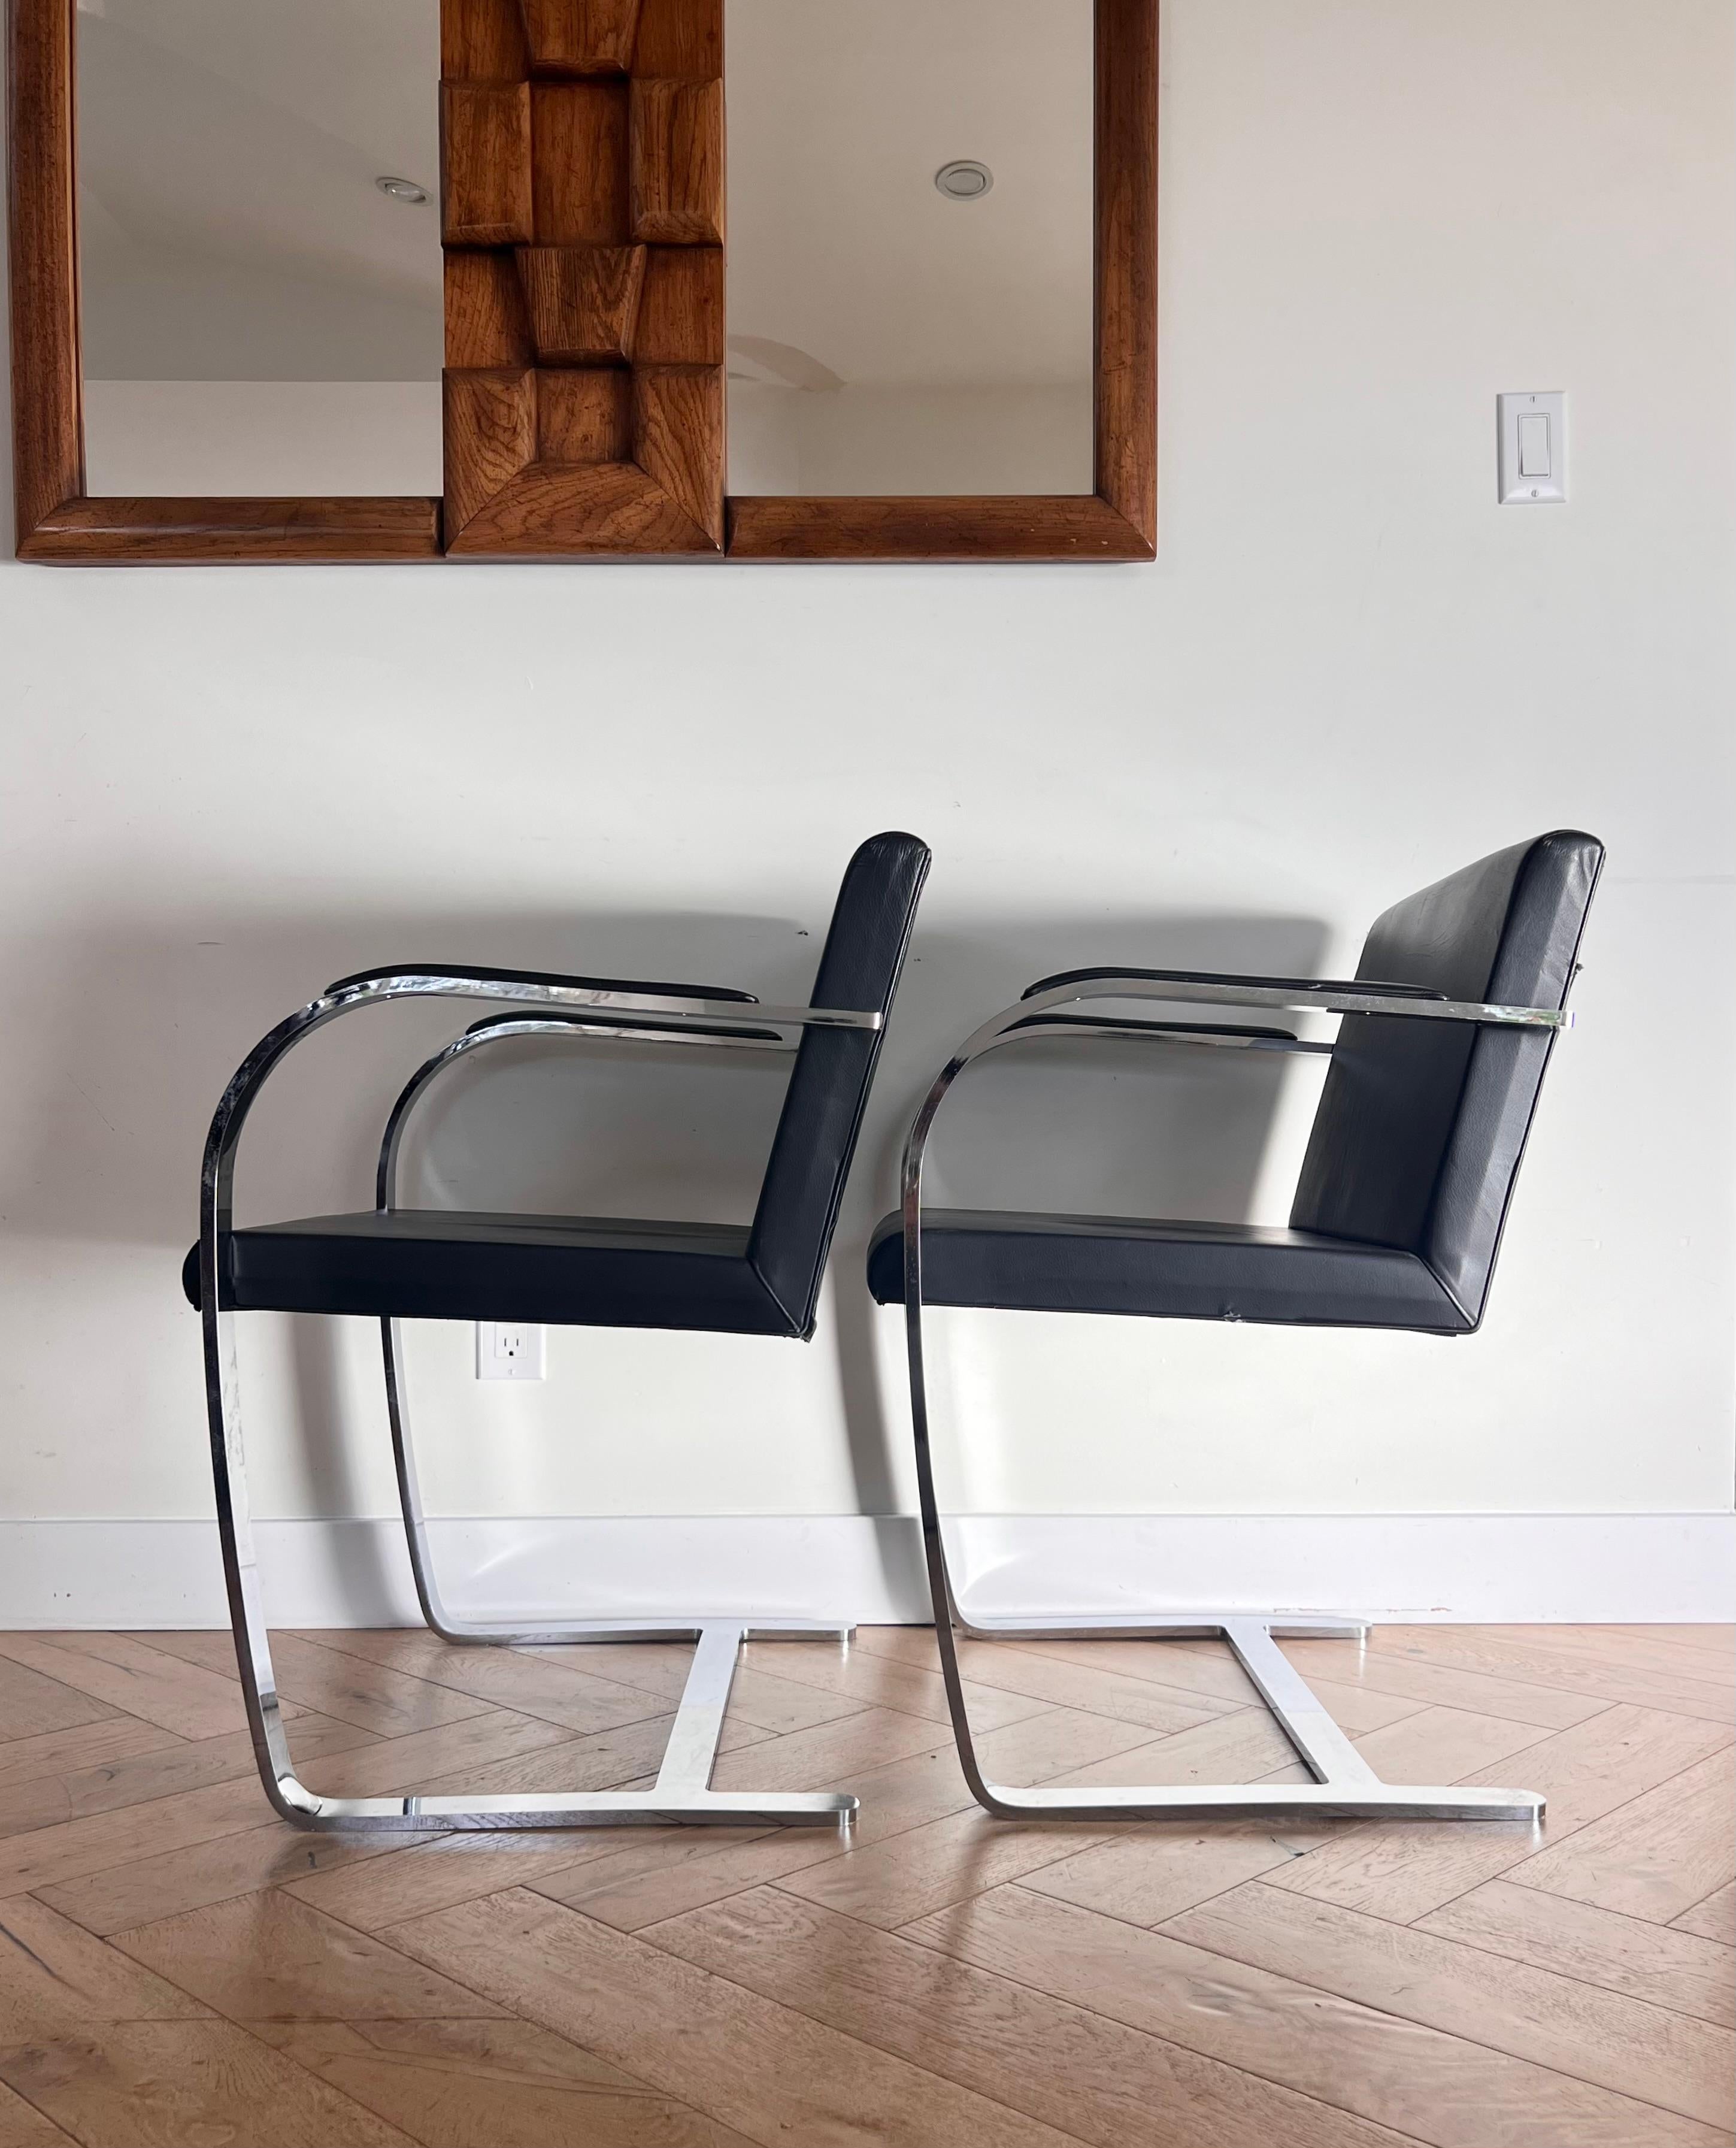 Pair of Mies van der Rohe Brno chairs by Palazzetti, 1970s In Good Condition For Sale In View Park, CA